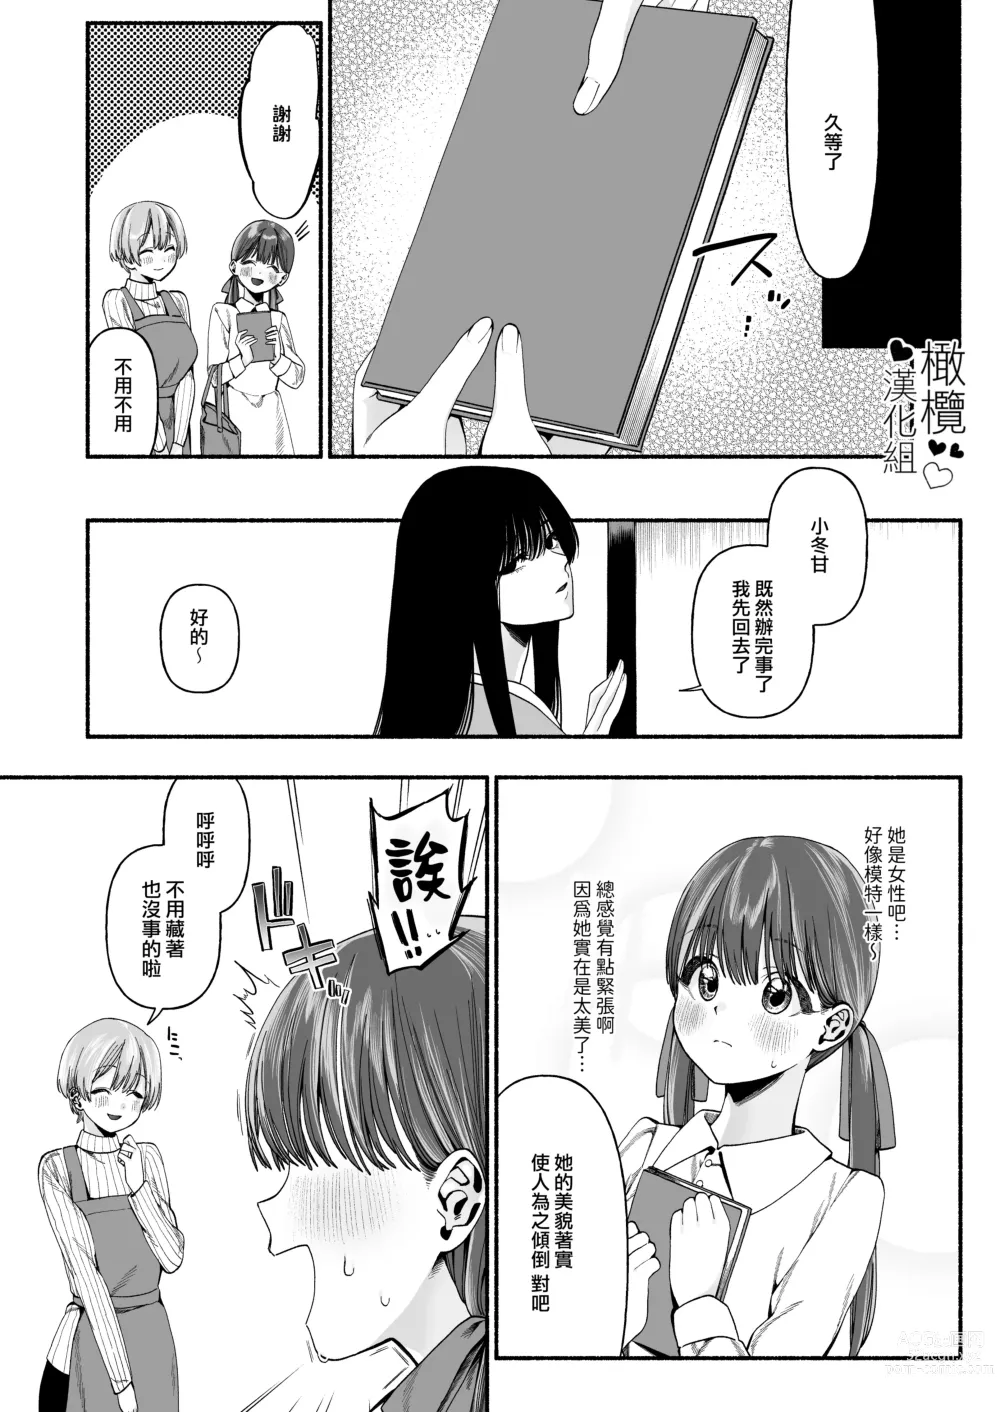 Page 4 of doujinshi 因報春鳥已死